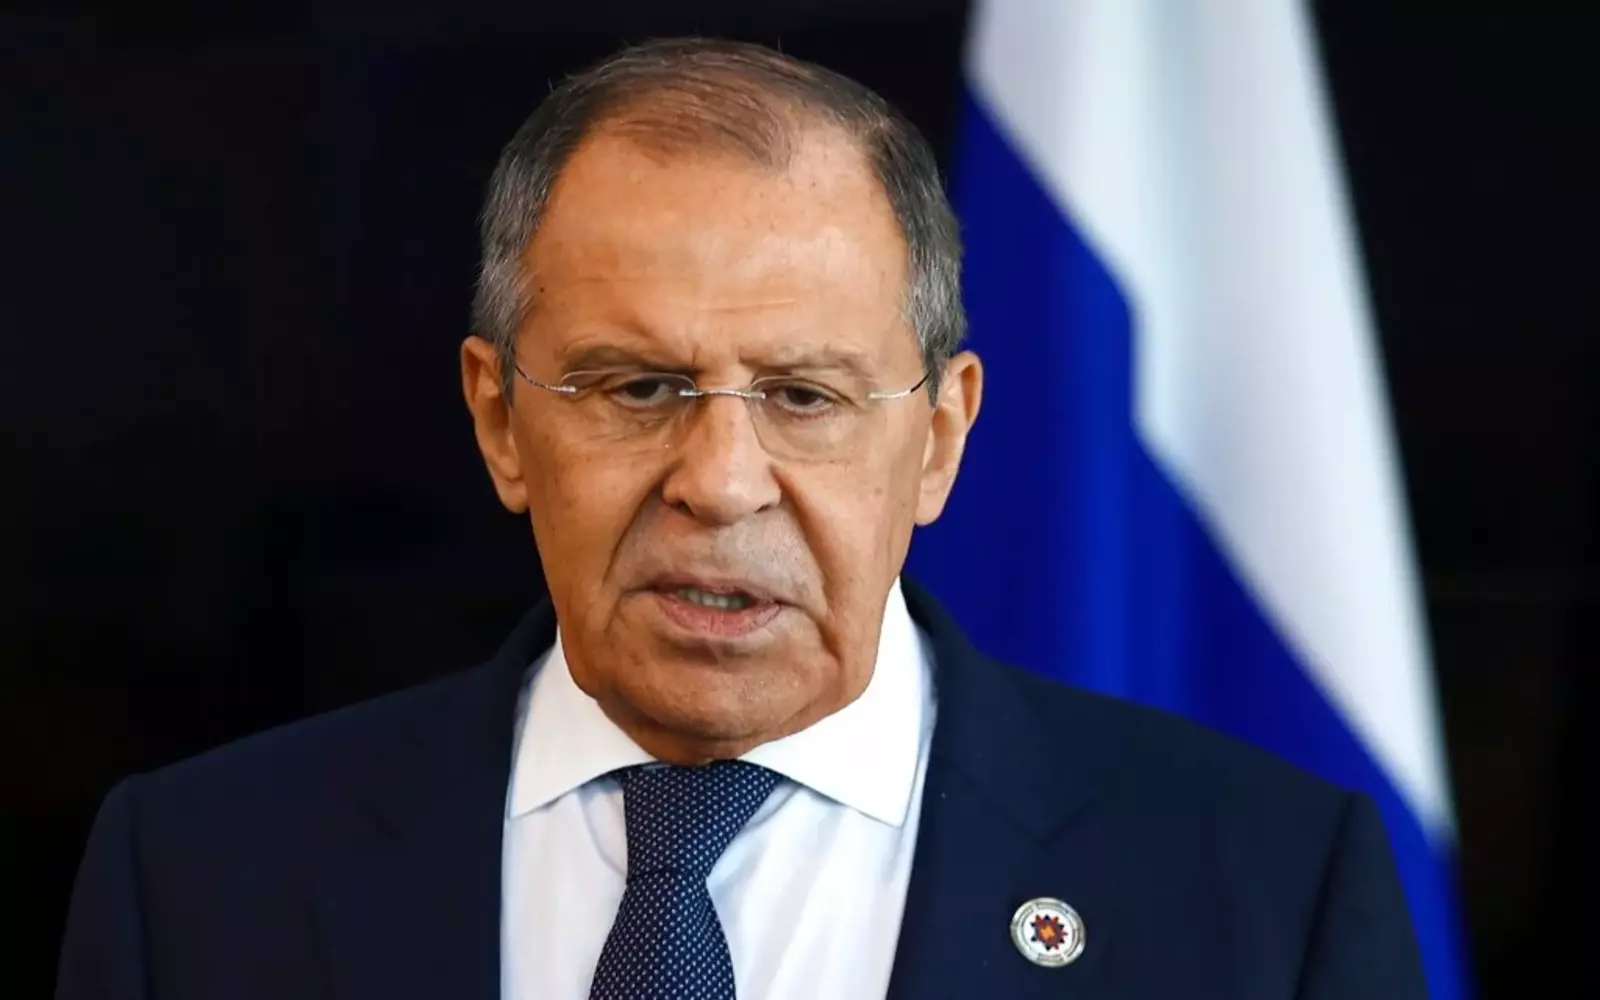 Russia says West teetering on conflict between nuclear powers